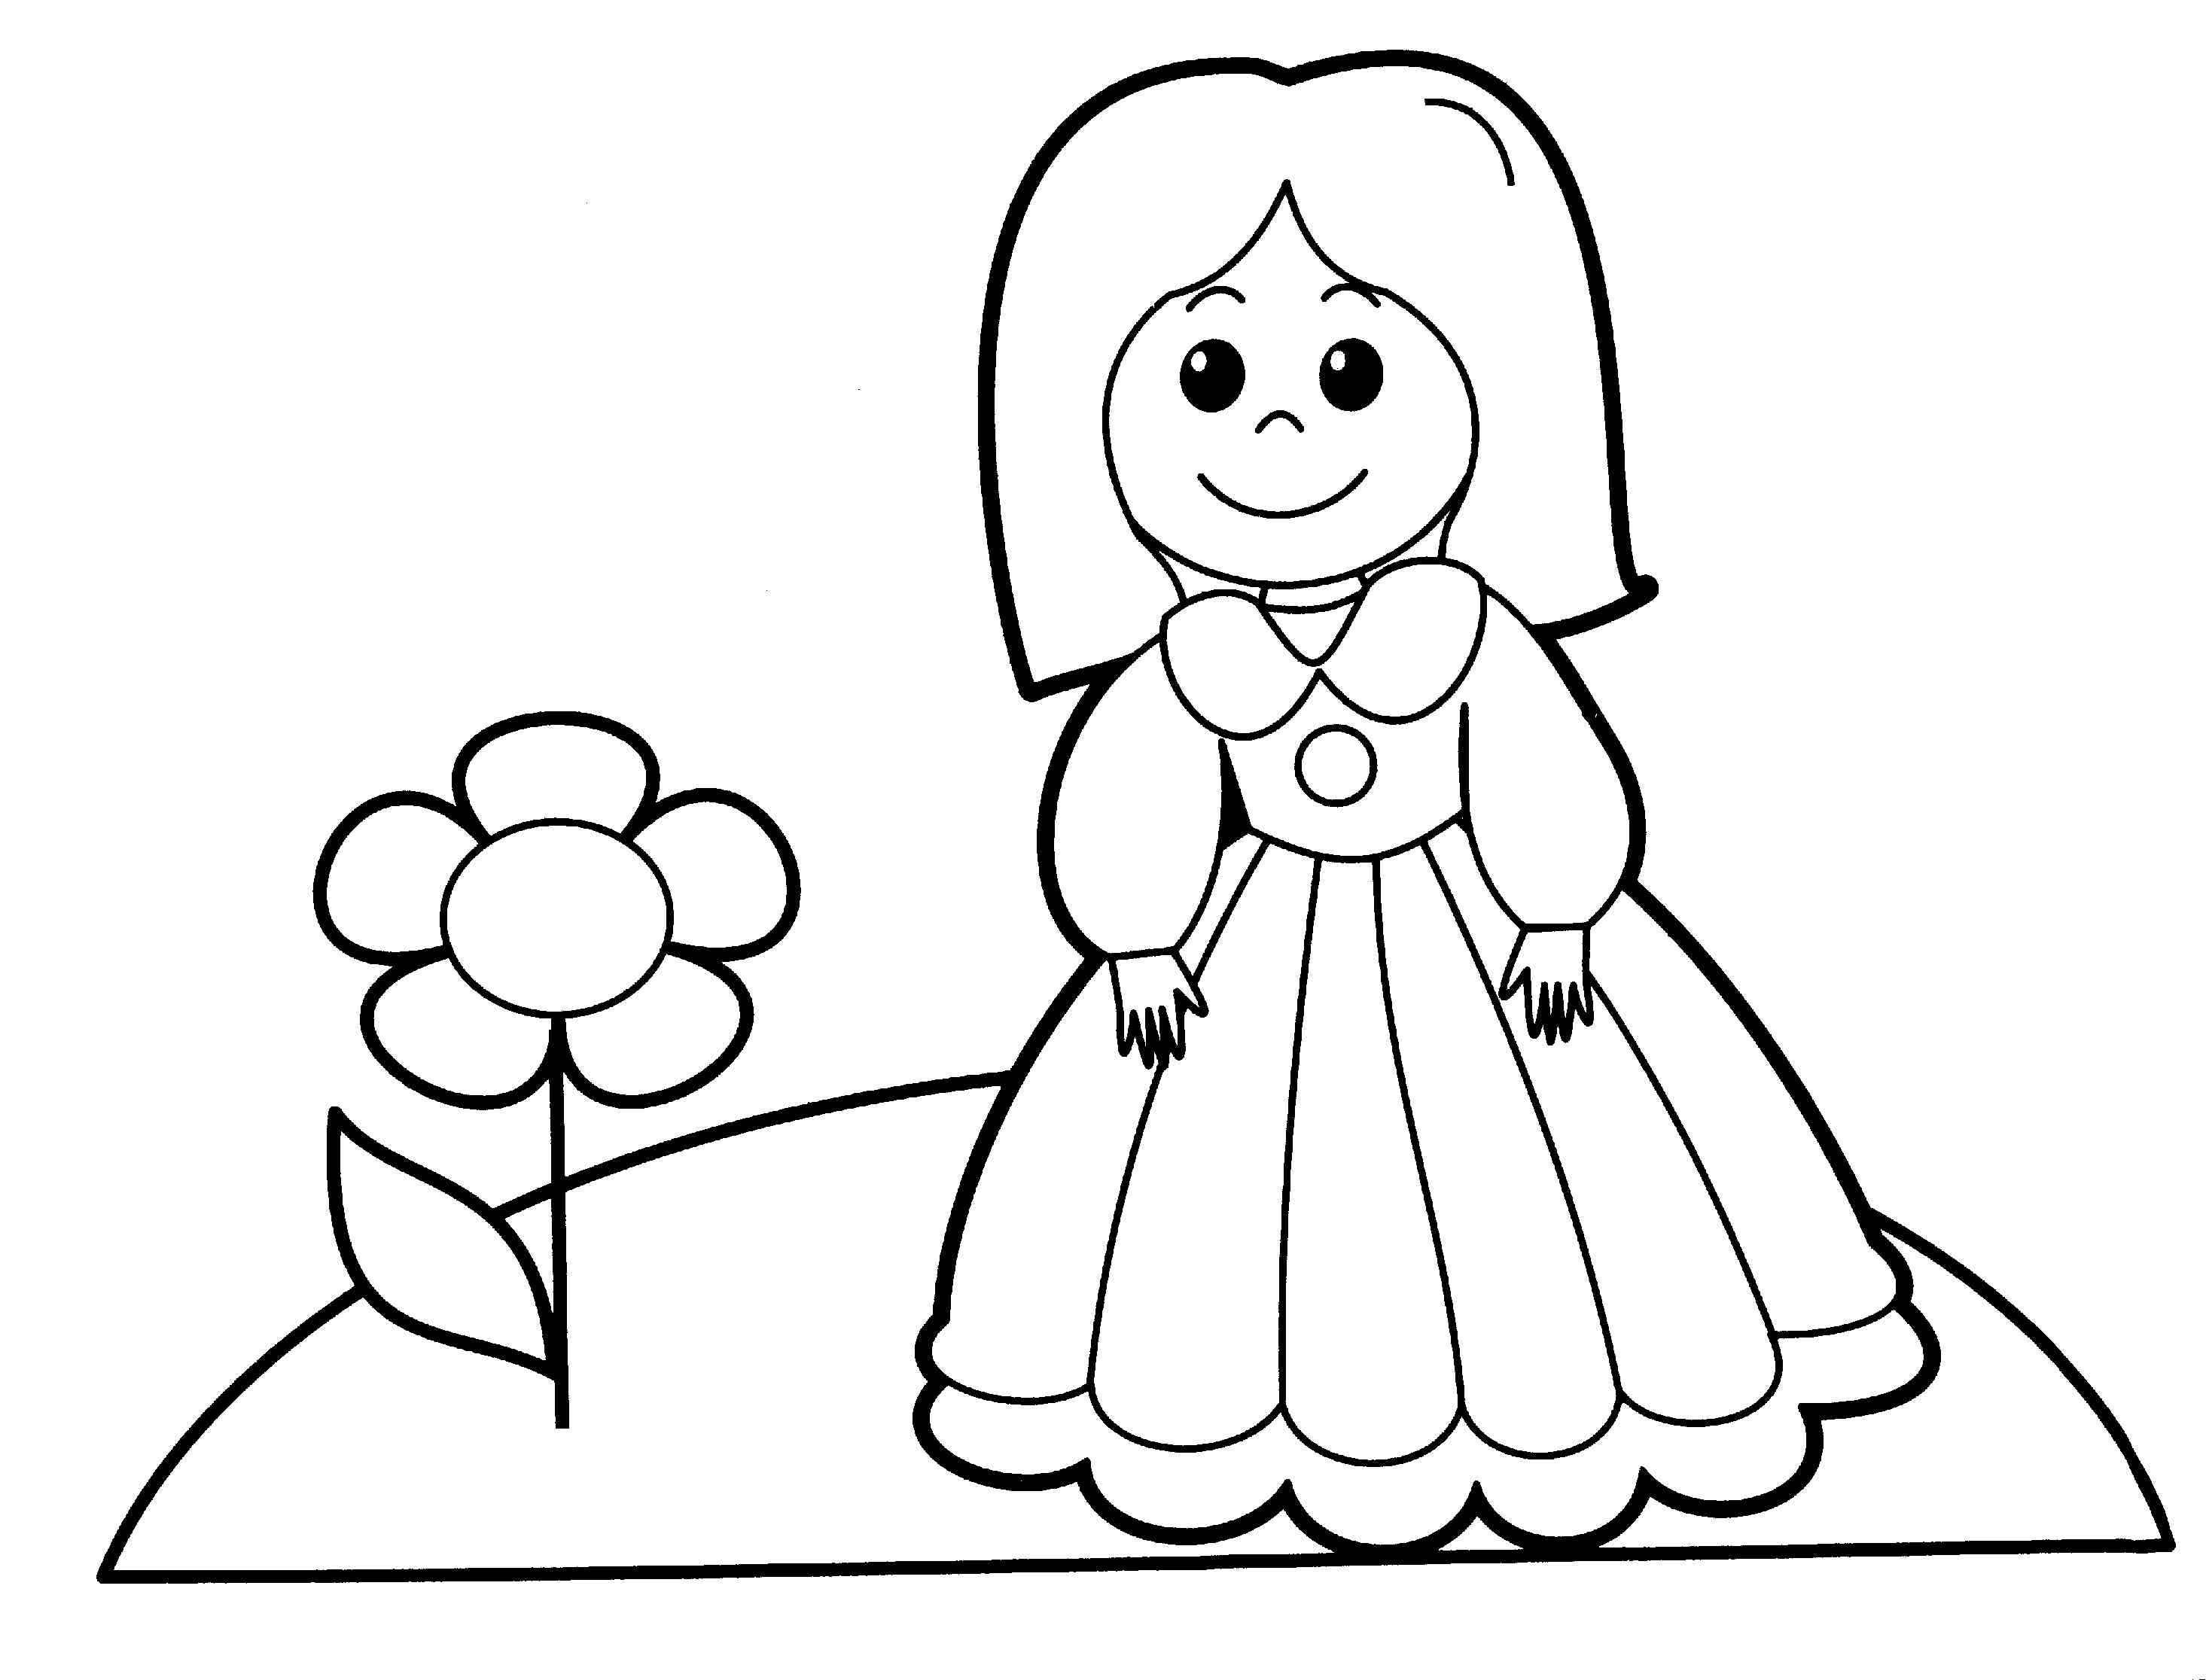 Free Printable American Girl Doll Coloring Pages: 25 Coloring ...